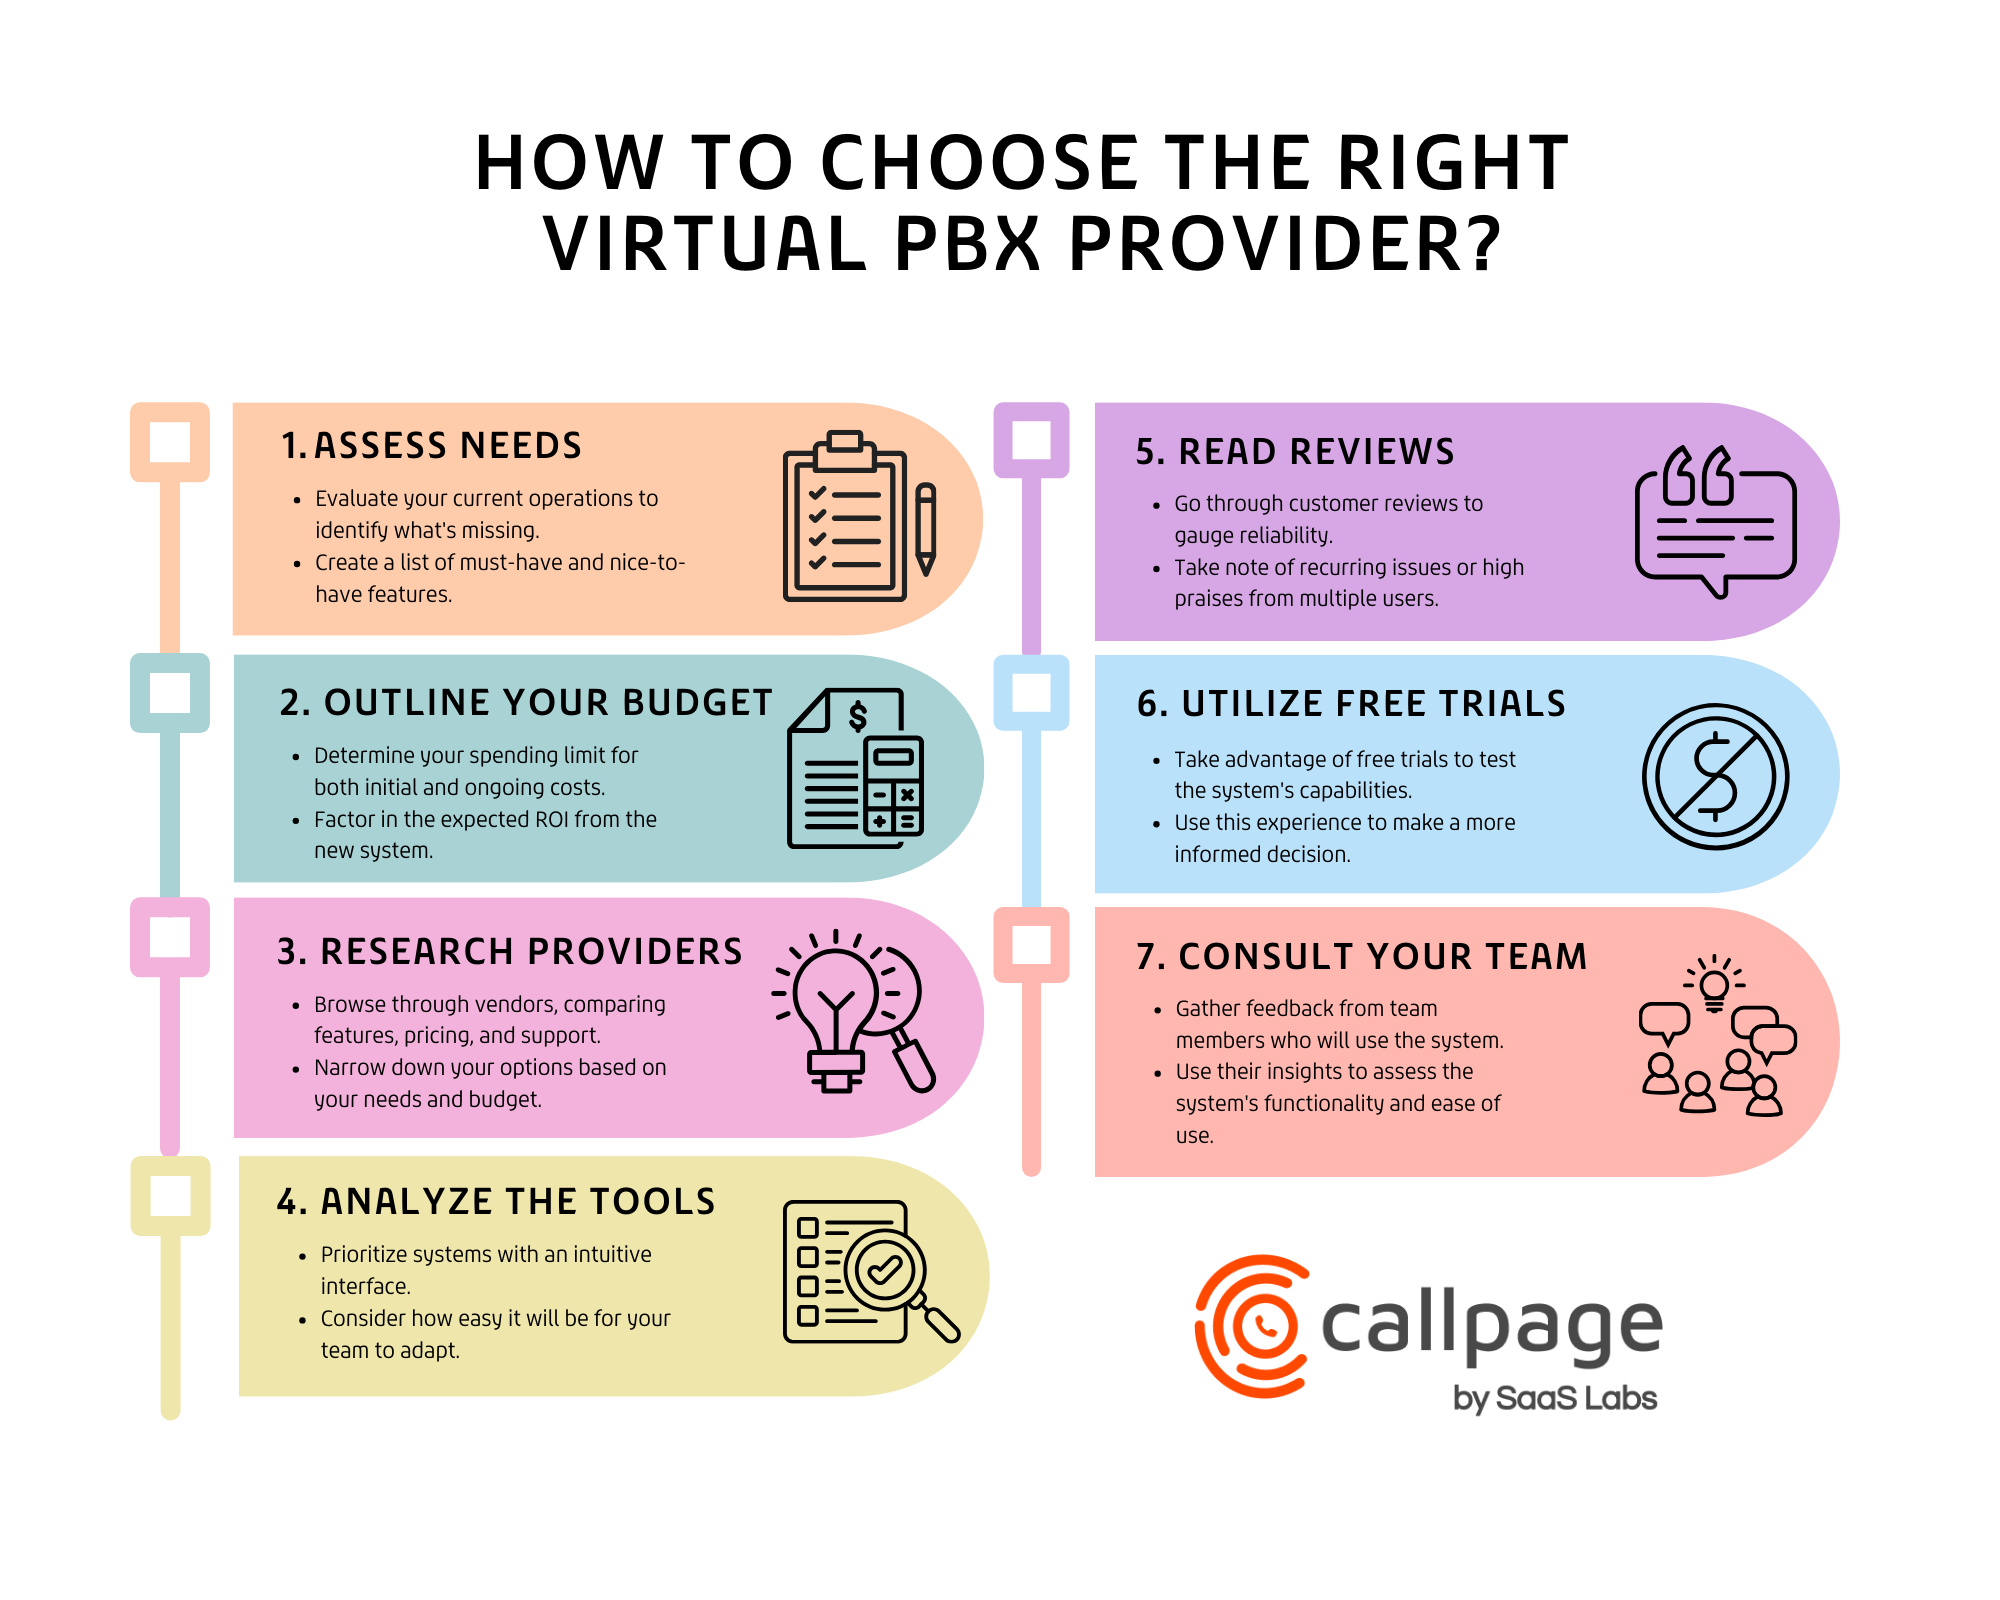 How to choose the right virtual PBX system provider? Seven steps